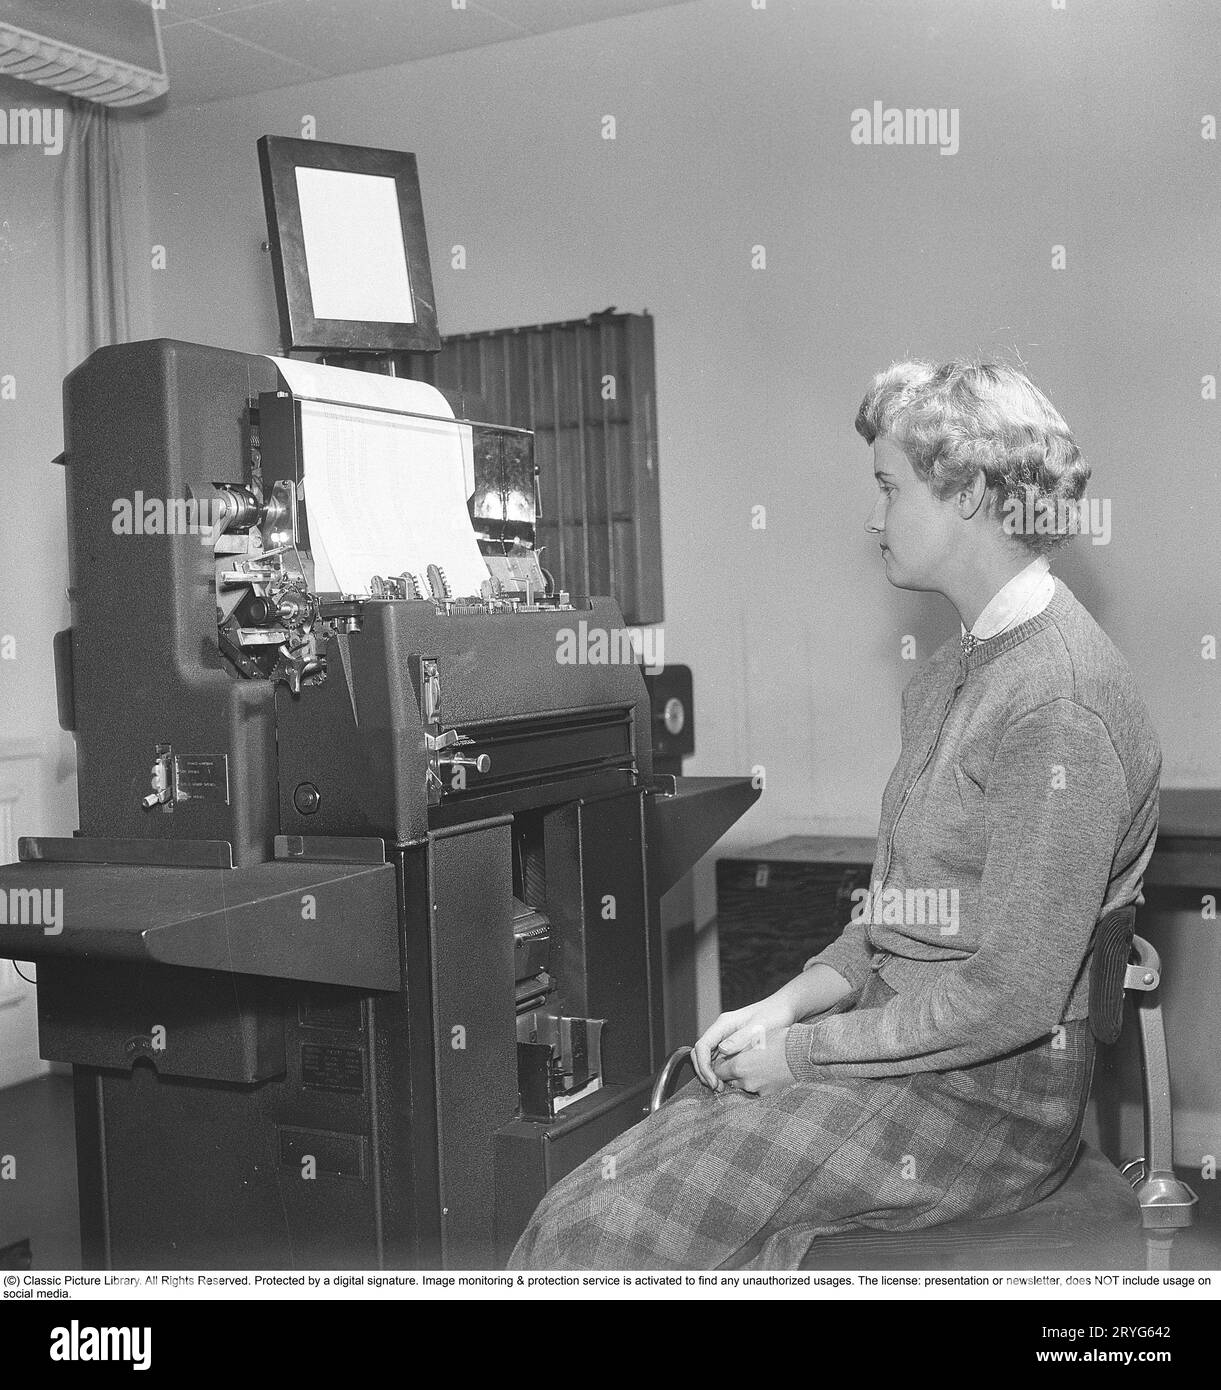 In the 1950s. A female clerk at punch card reader machine overlooking it's function and the feed of  the punch cards into the machine. Punched cards was created by another machine, entering information, creating the punch cards as a storage medium where the punched holes in the paper card were the input information. The picture shows the machine reading the information from the punch cards, then printing it. The machine is made by the british manufacturer Powers-Samas who developed the encryption machine, far better and safer then the german Enigma.  Sweden 1954. Kristoffersson ref BM85-10 Stock Photo